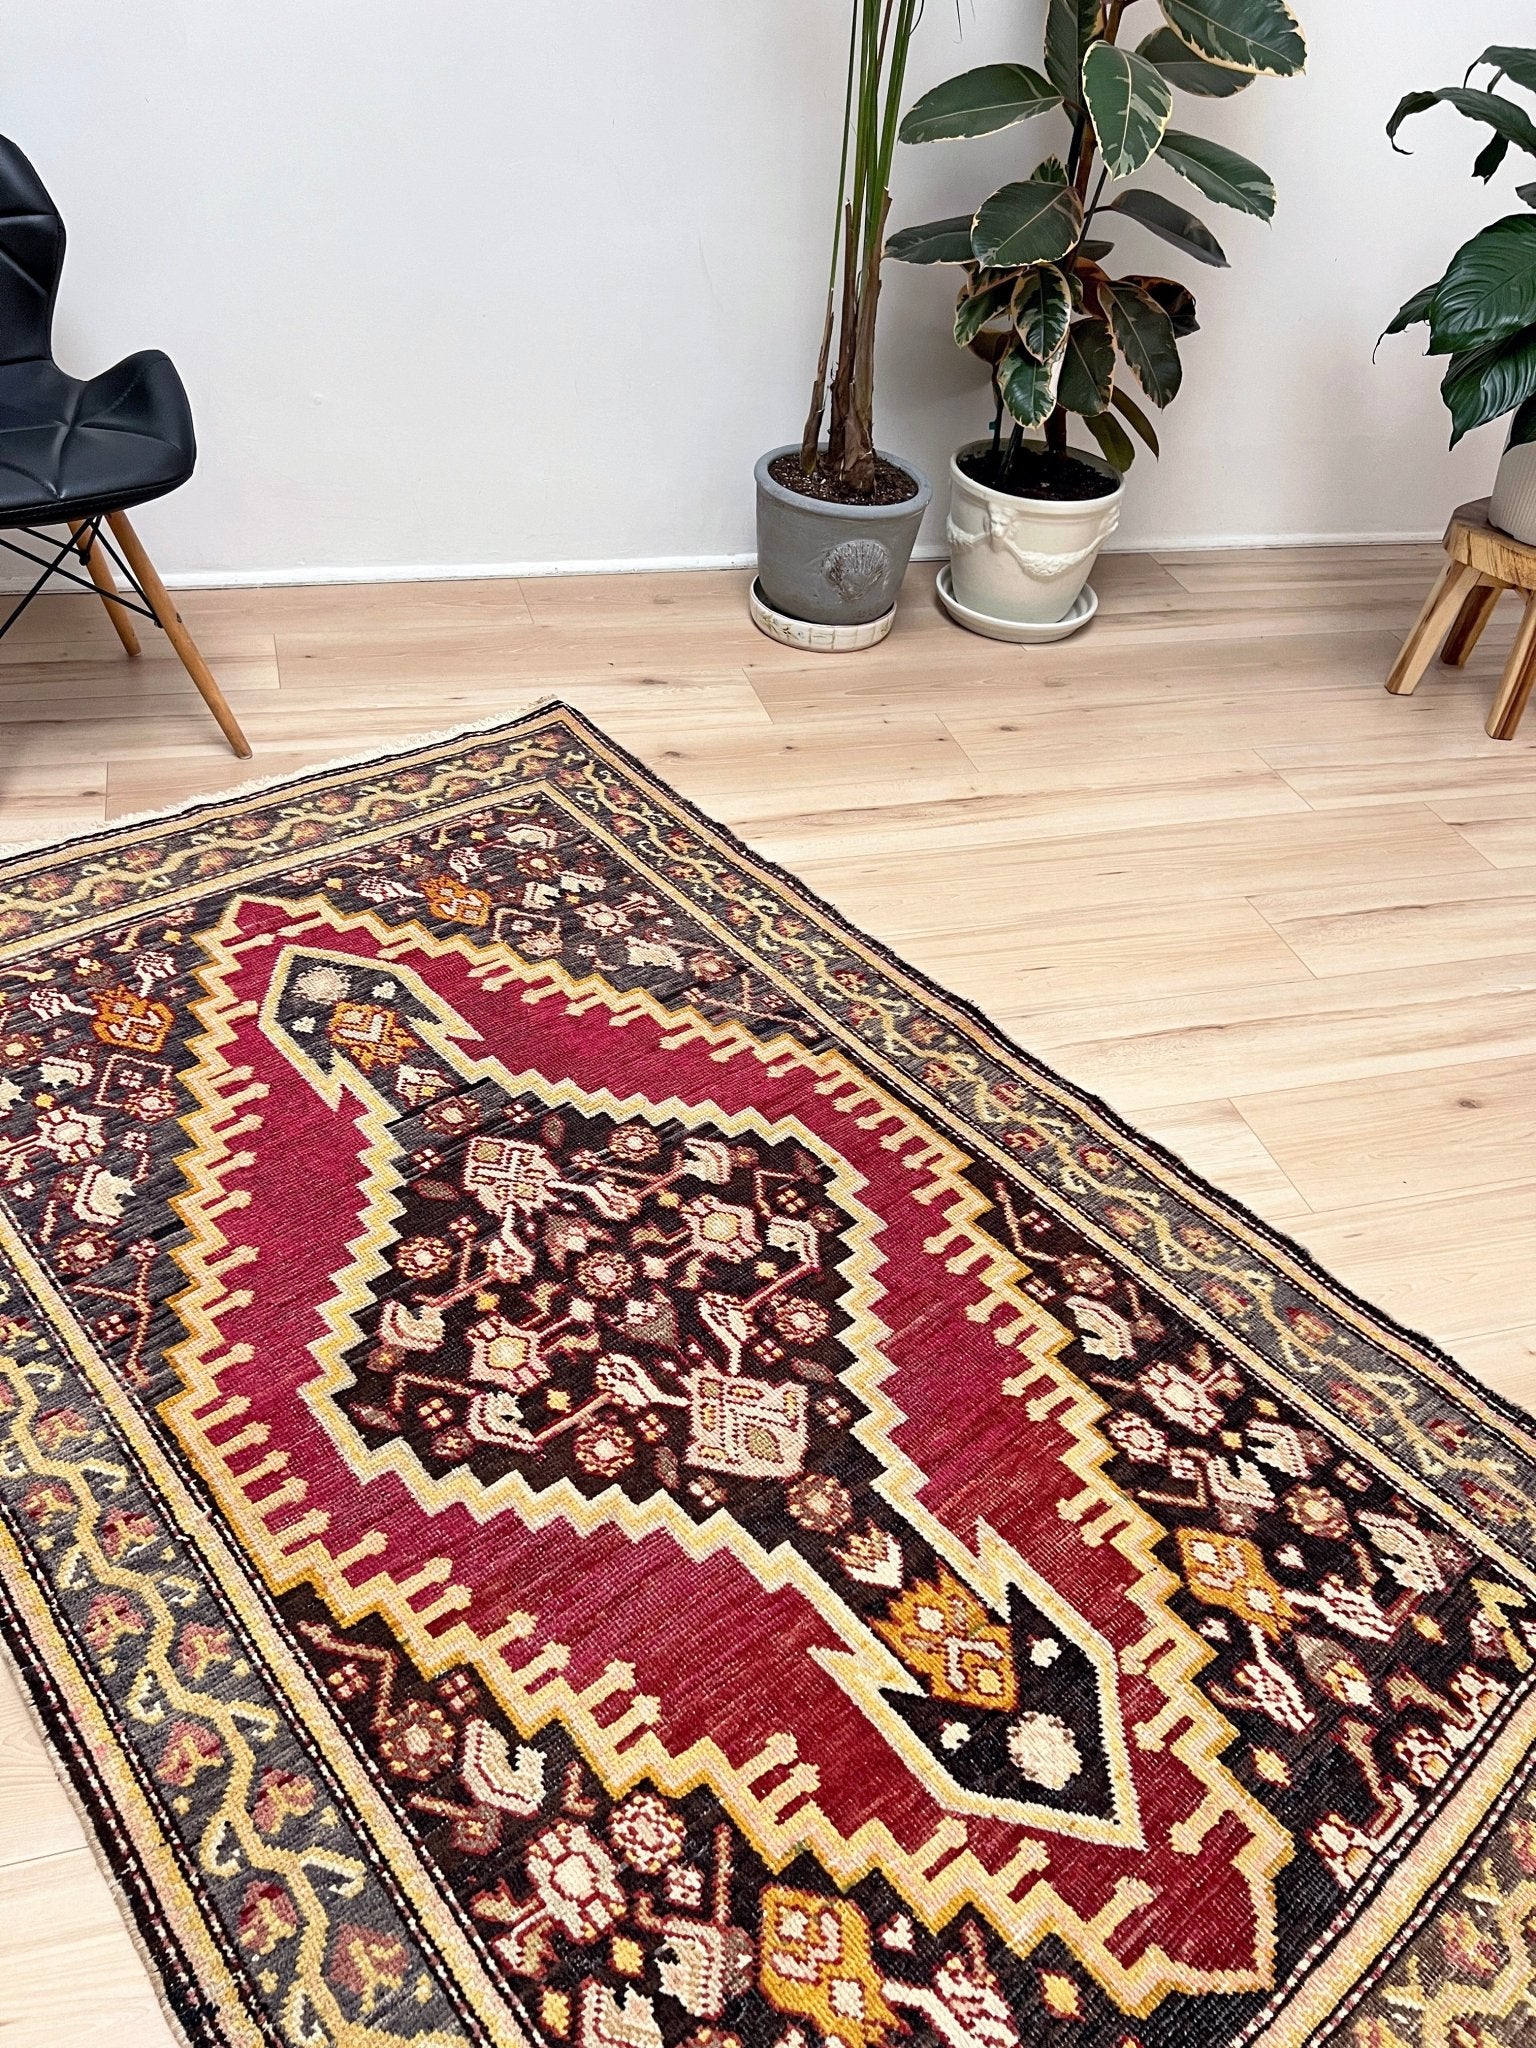 Derbend Caucasian 4x6 ft small Scatter handmade rug. Oriental rug shop San francisco bay area. Buy rug online free shipping